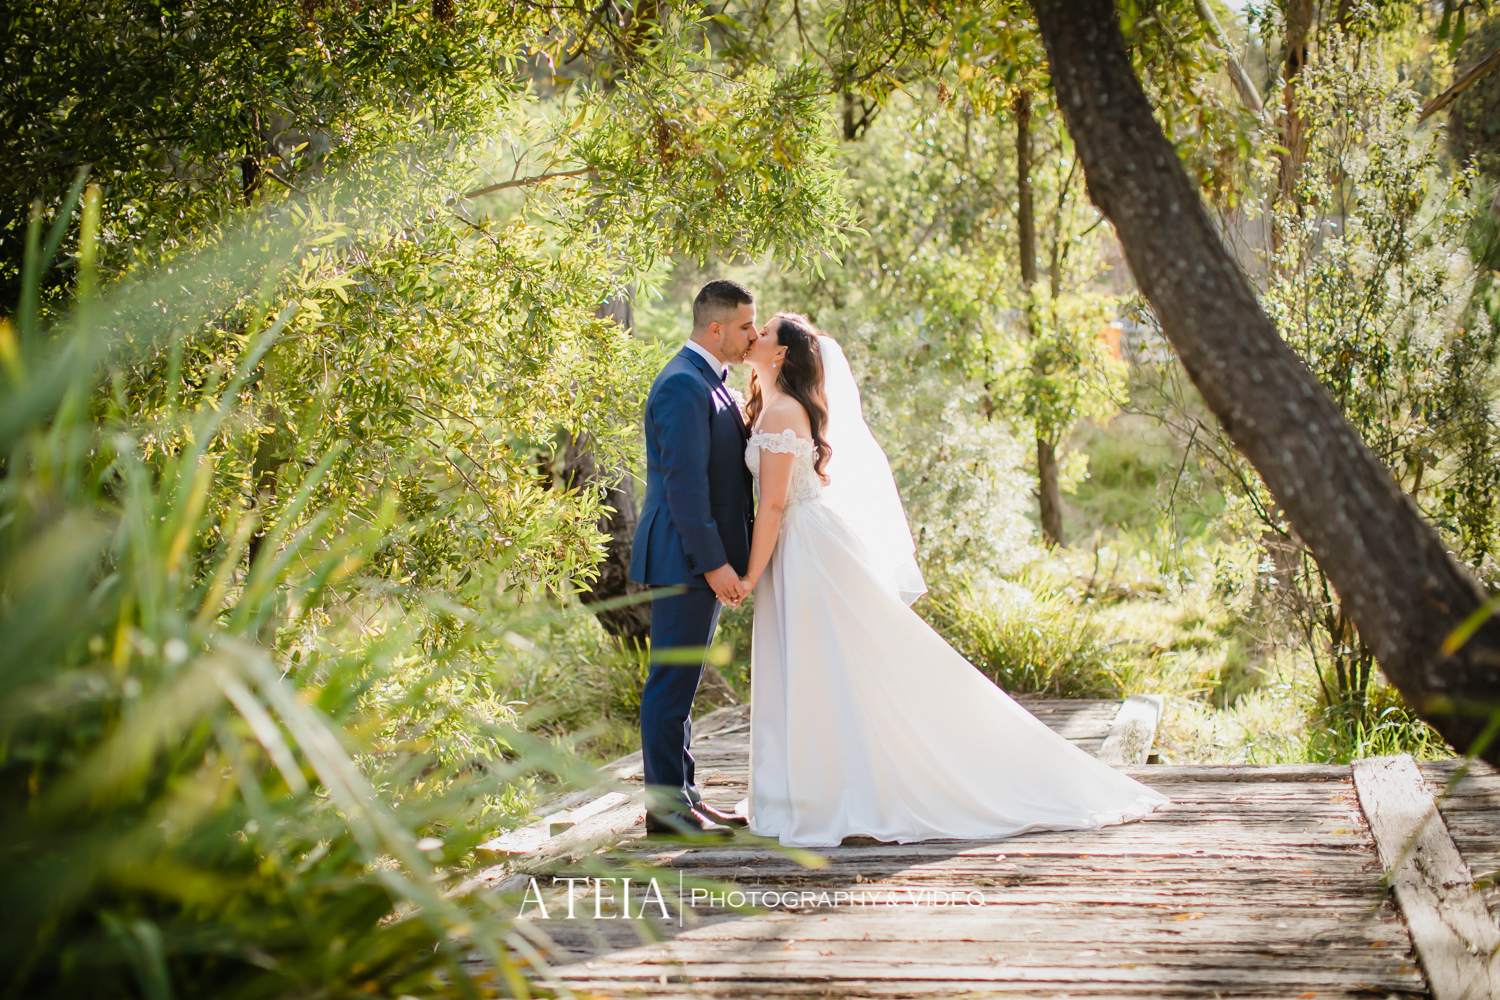 , Potters Receptions Wedding Photography Warrandyte by ATEIA Photography &#038; Video